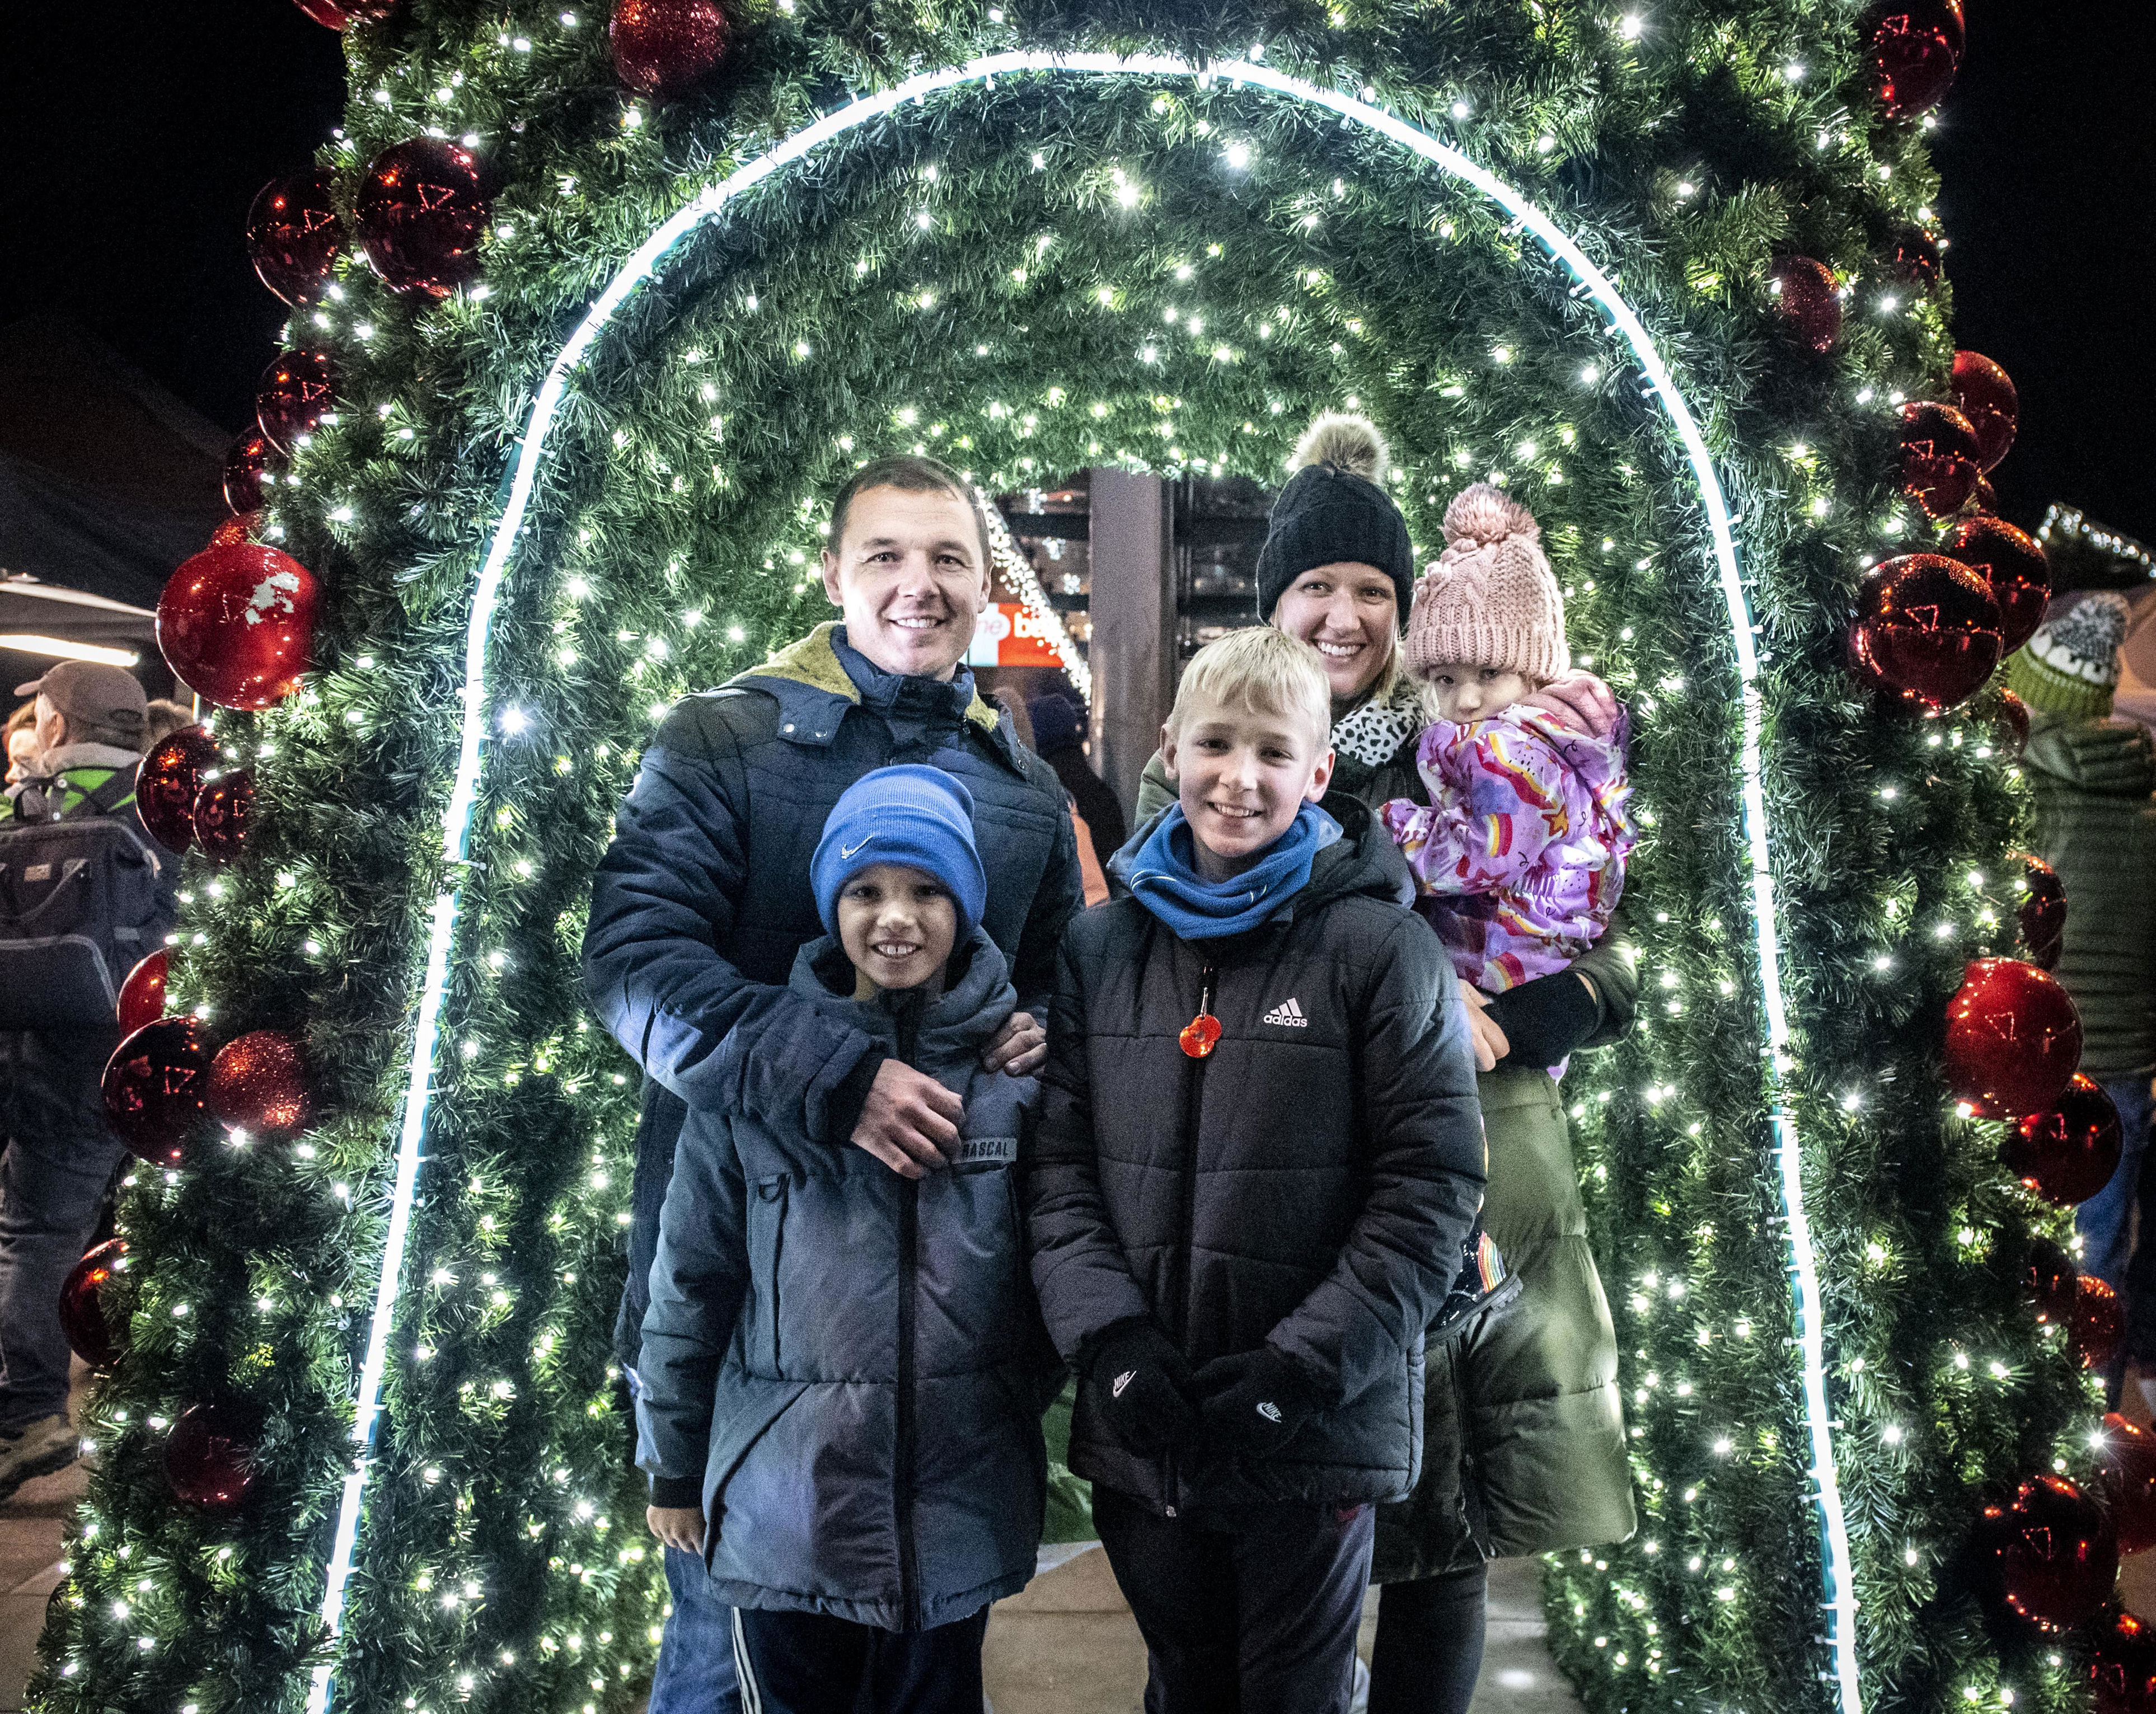 Sheffield's Fox Valley Christmas lights switchon promises live